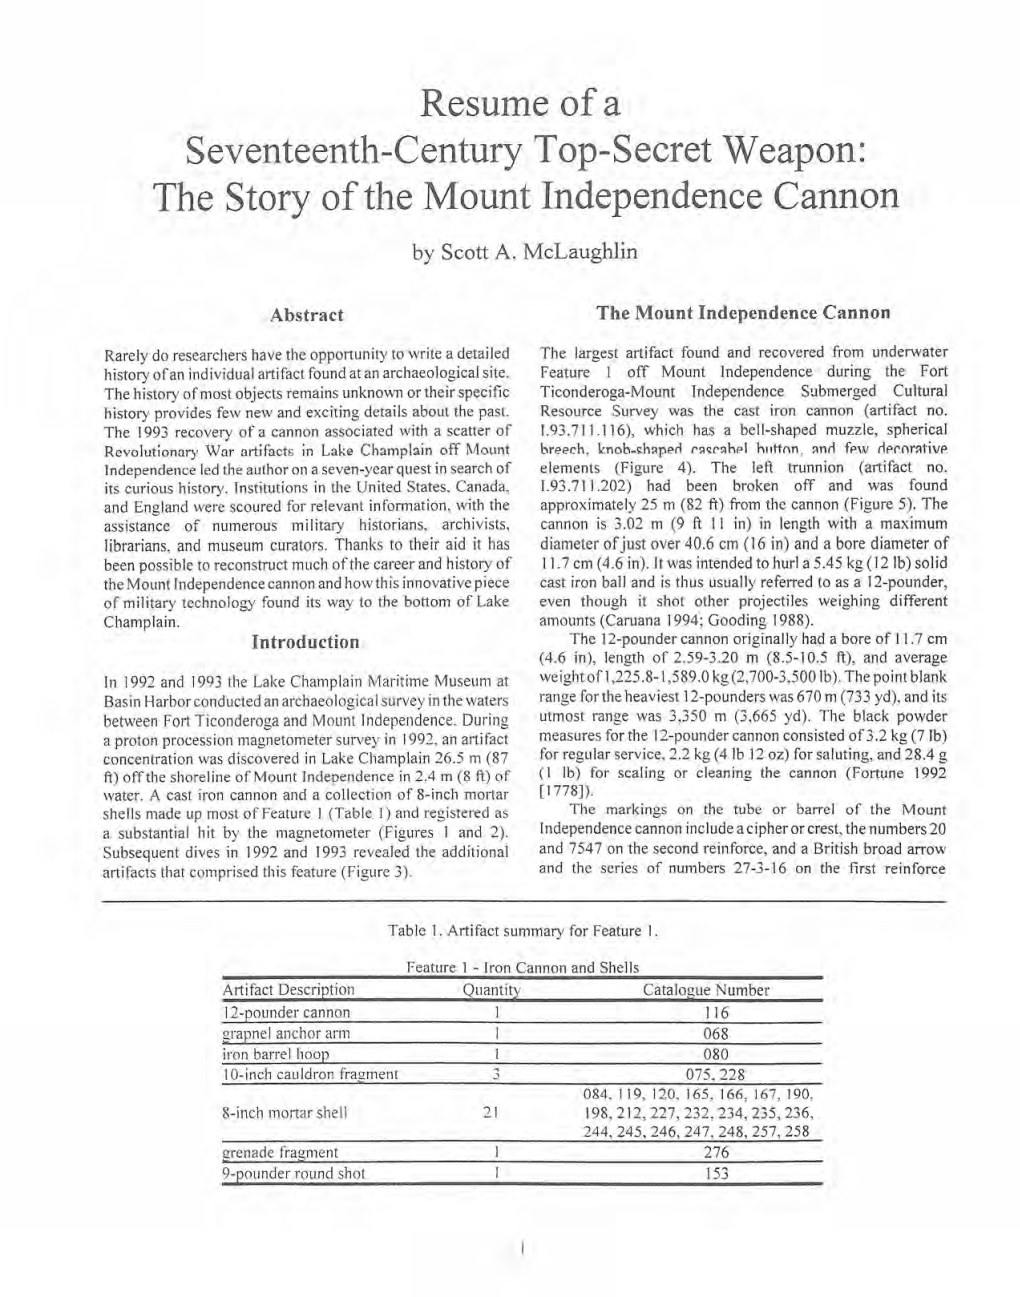 The Story of the Mount Independence Cannon